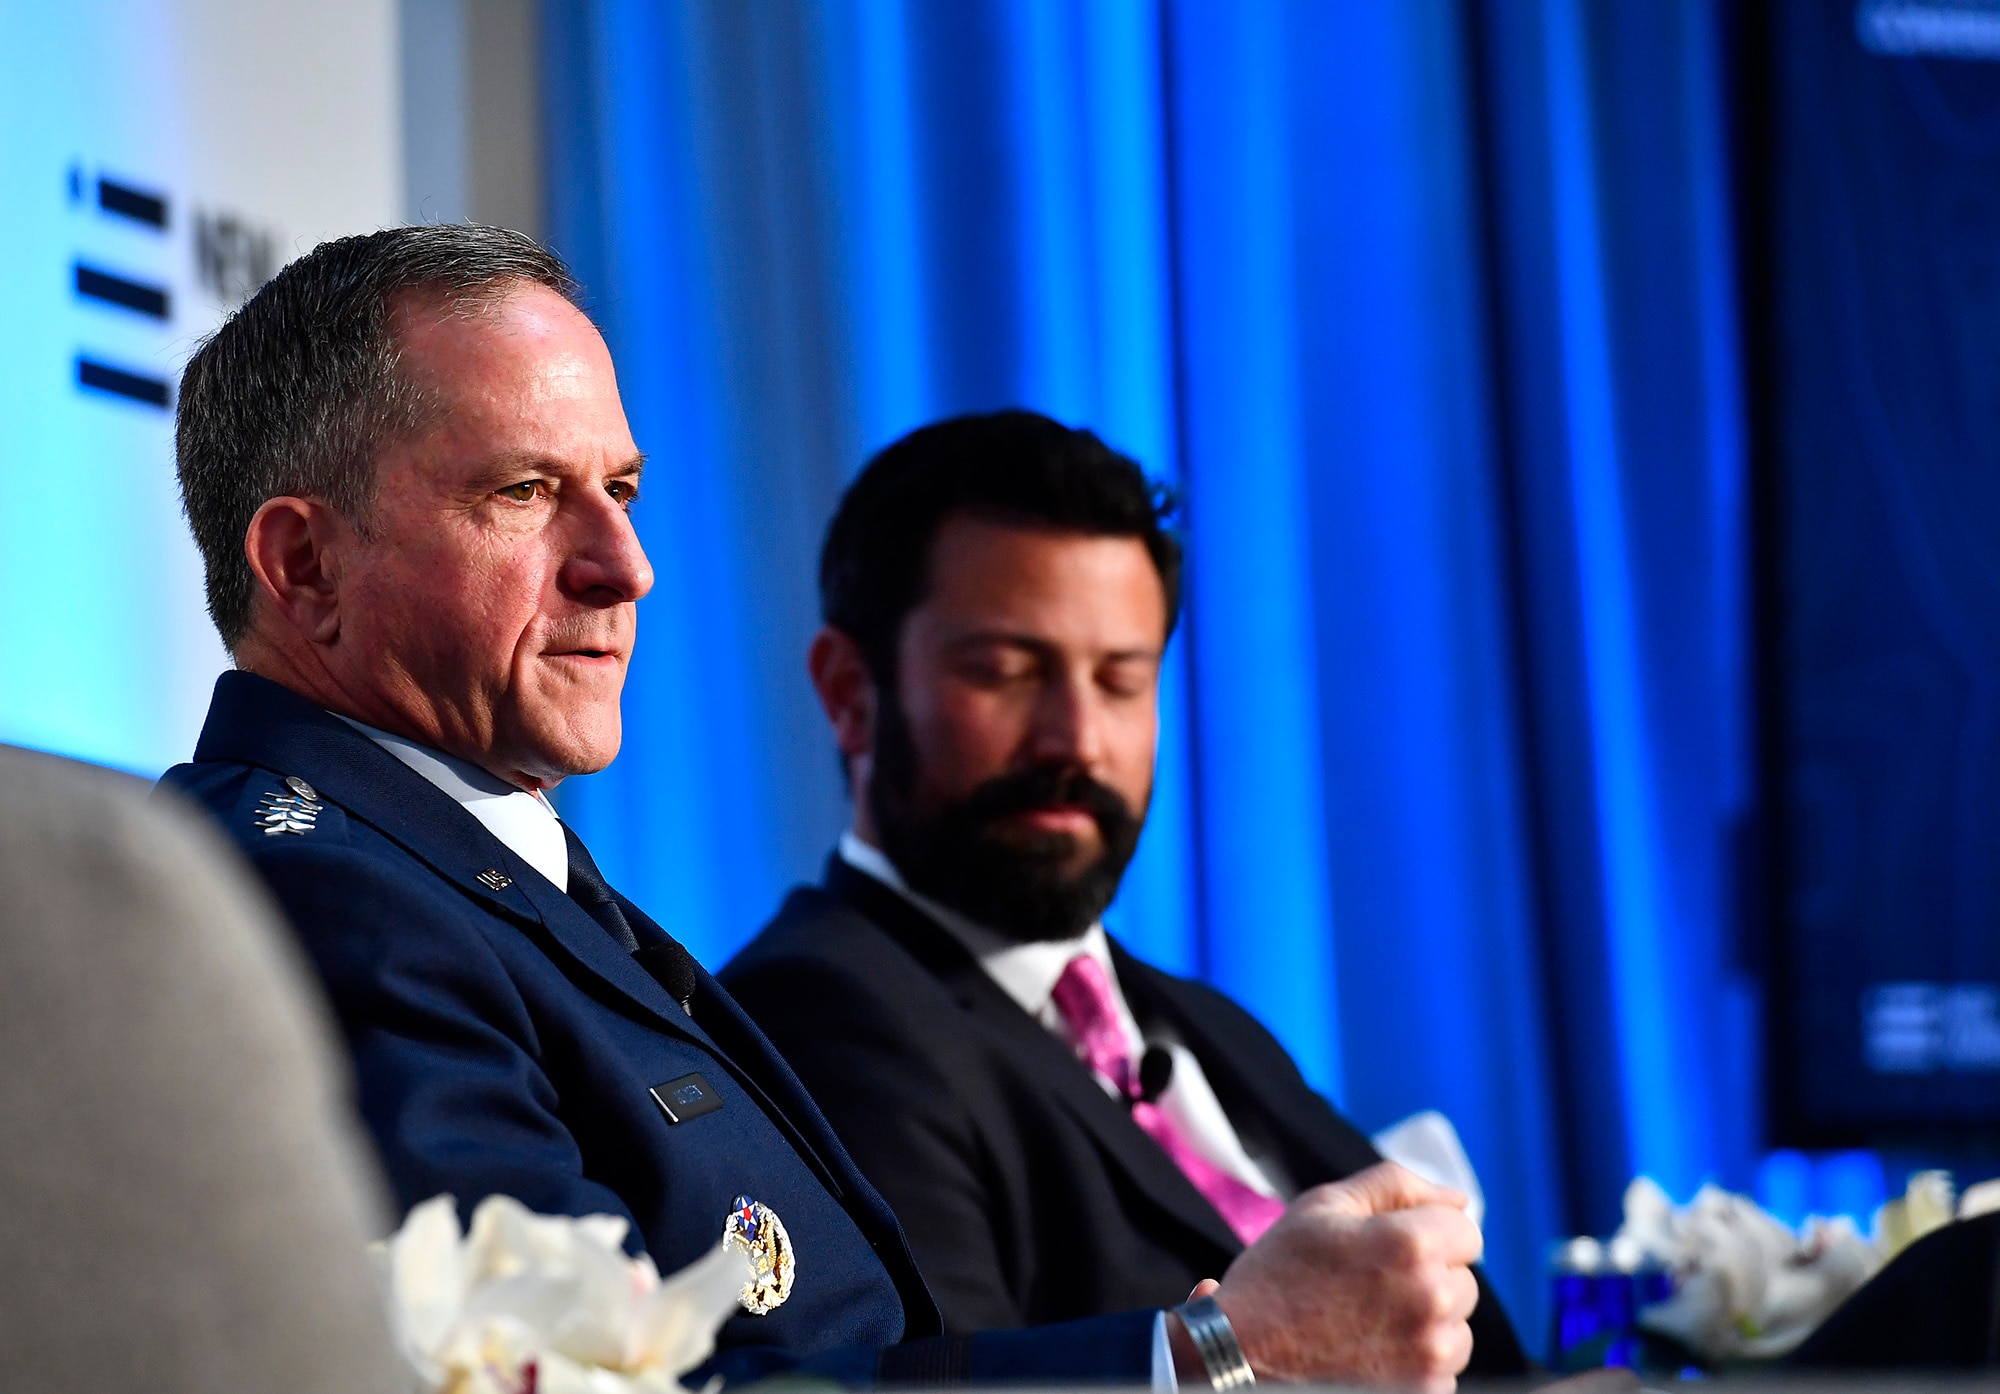 Air Force Chief of Staff Gen. David L. Goldfein discusses the future of warfare with Kevin Baron, from Defense One media outlet, at theFuture of War conference March 21, 2017, in Washington, D.C. (U.S. Air Force photo/Scott M. Ash)